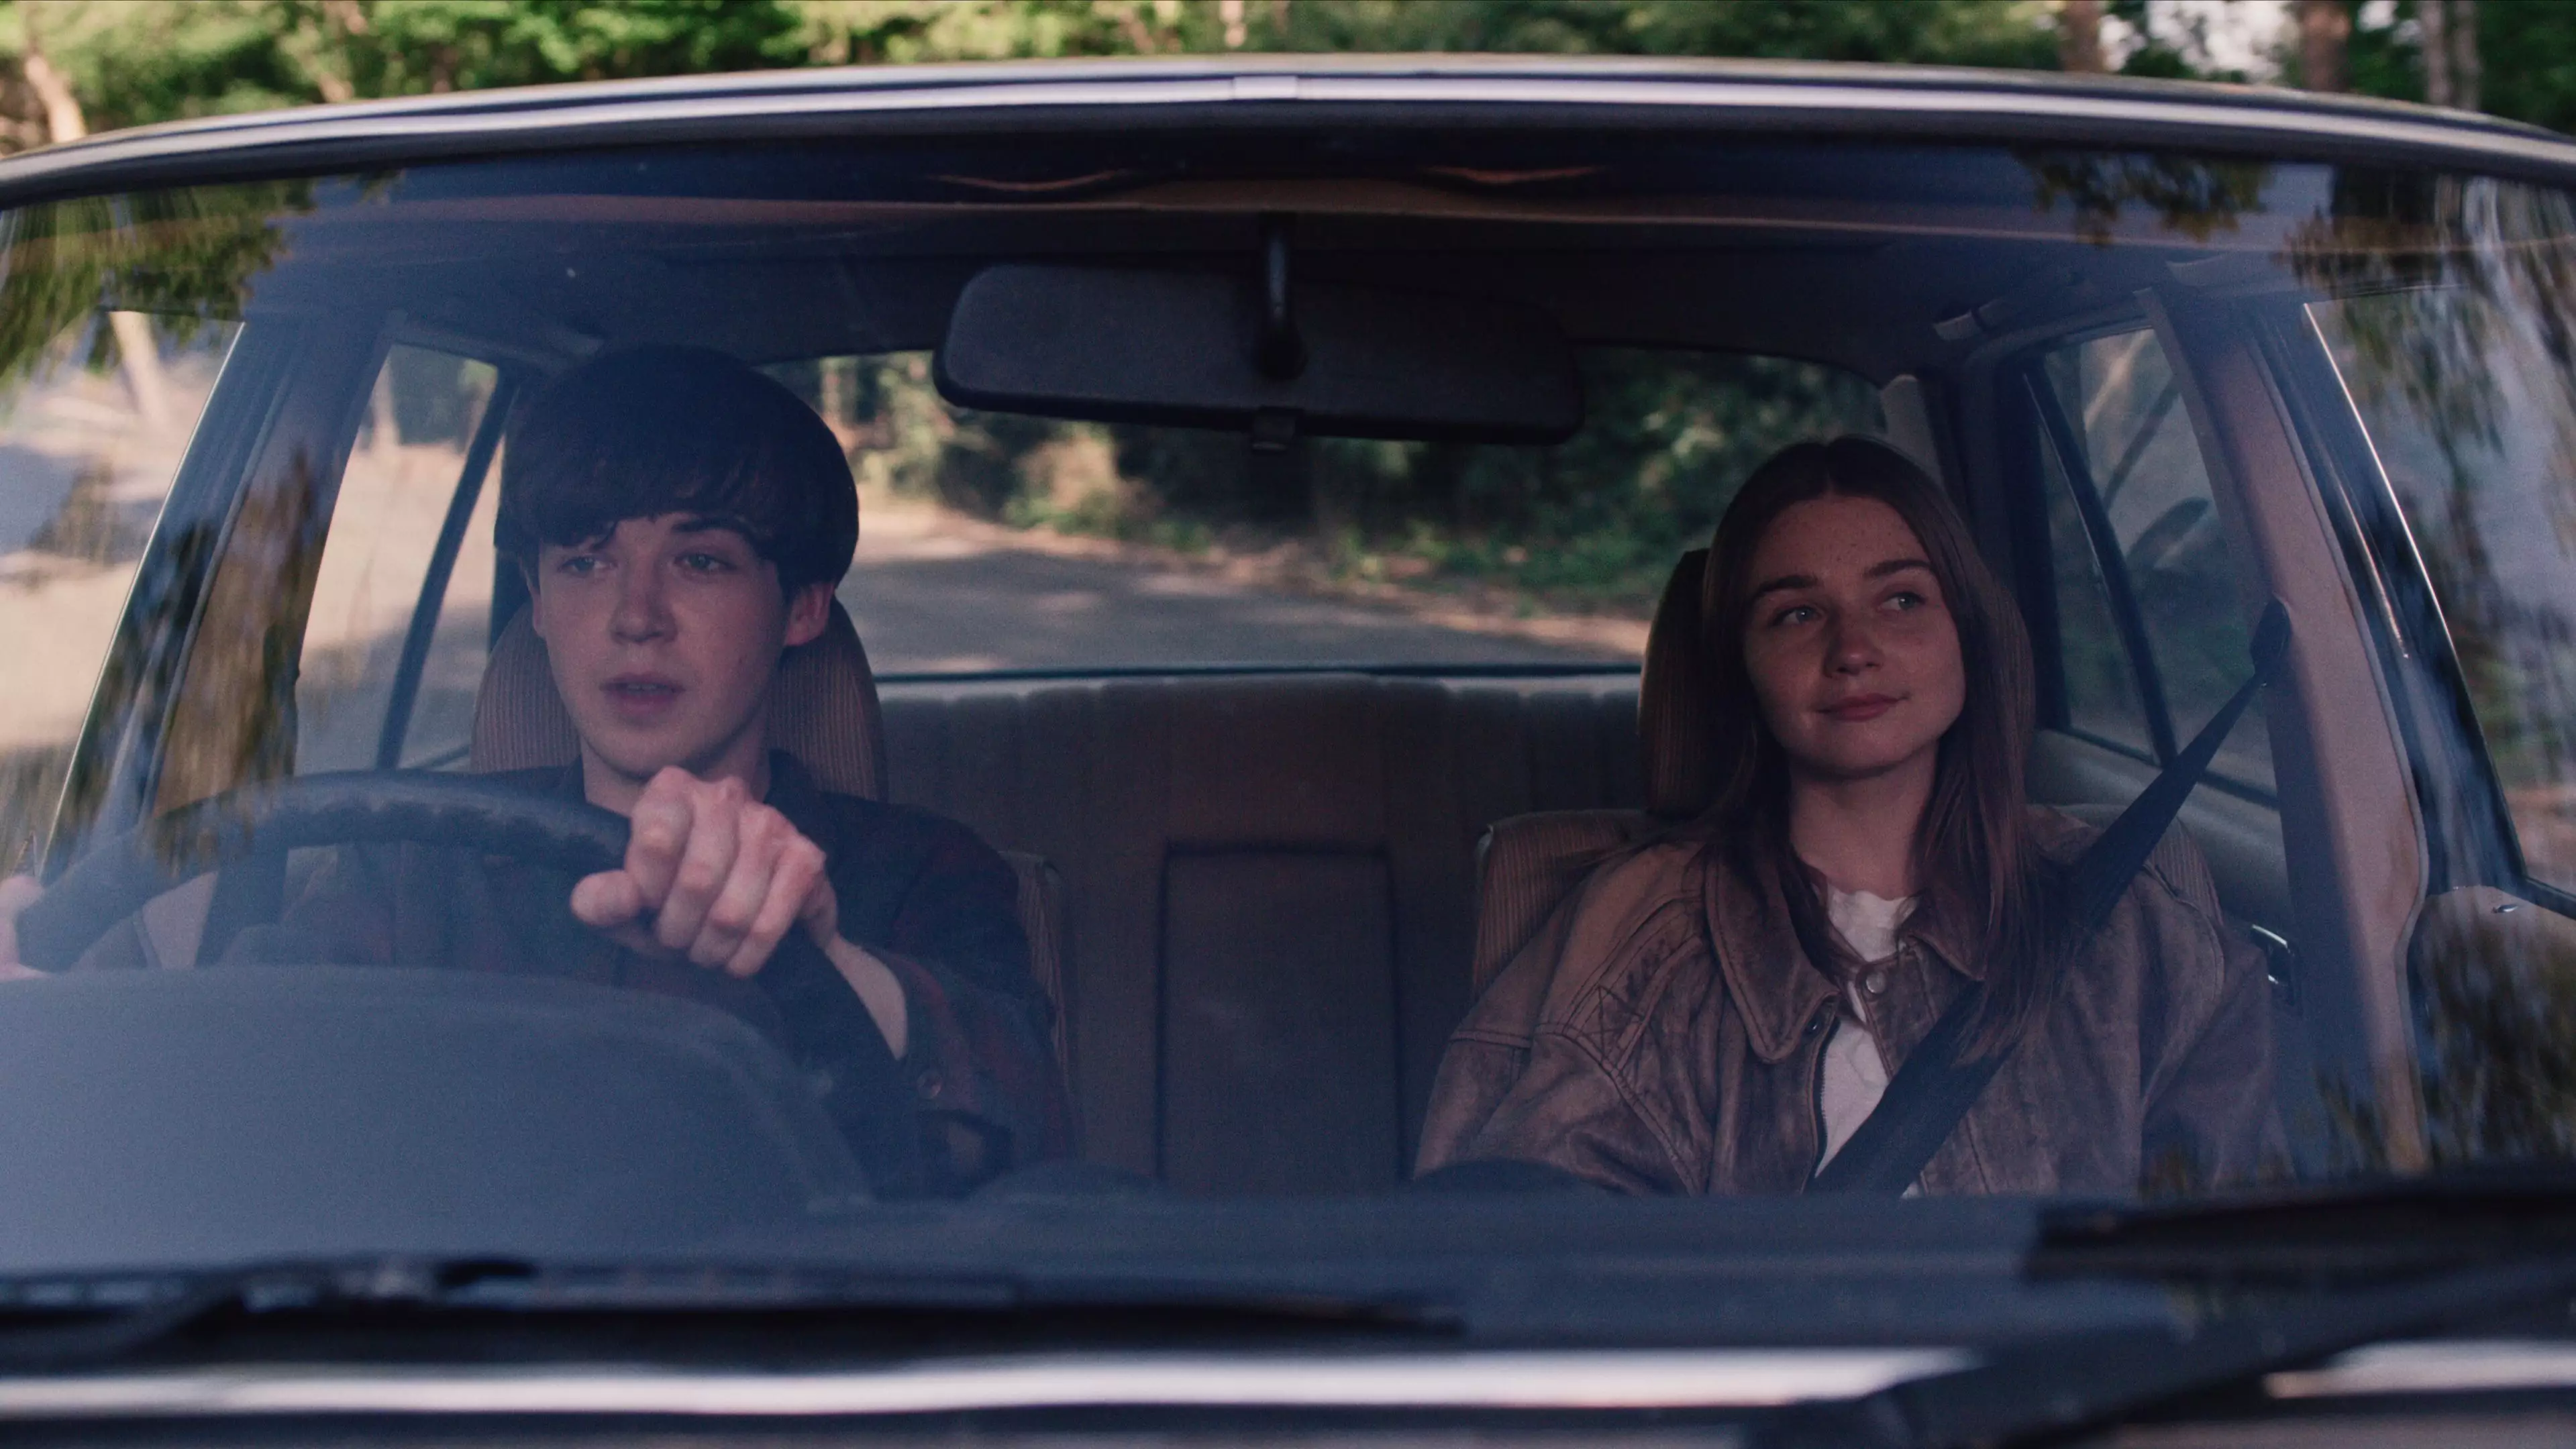 Filming For 'The End Of The F***ing World' Season 2 Has Started - Here's What We Know